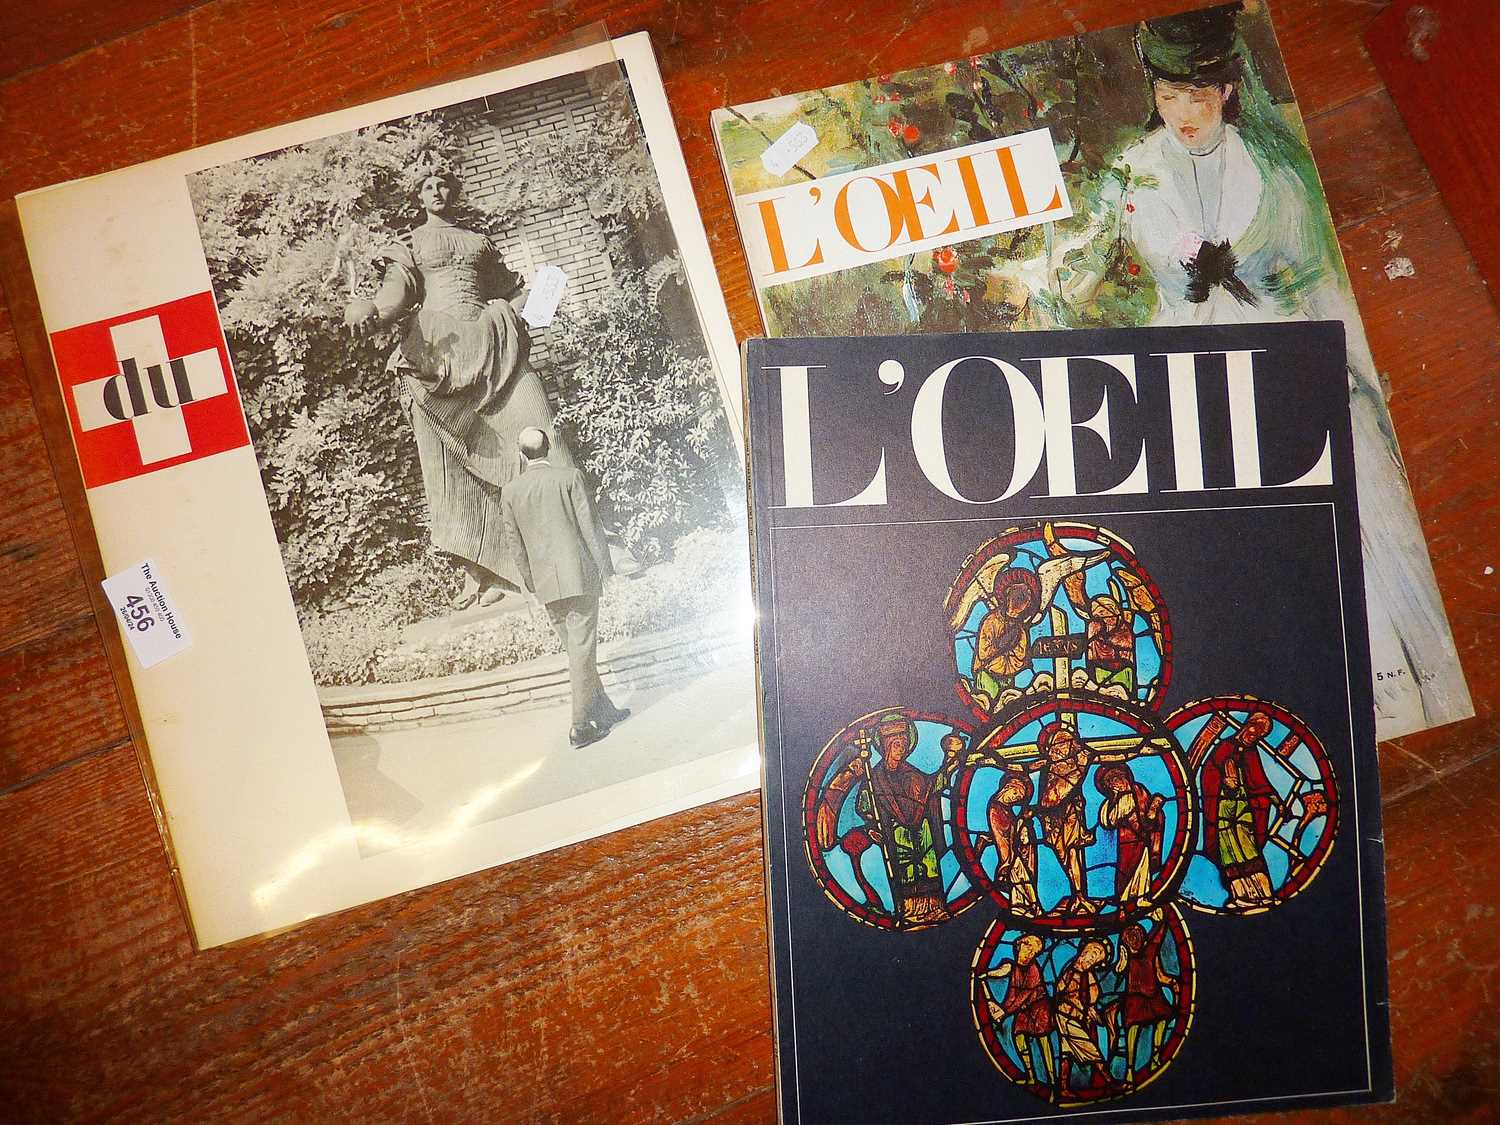 1967 issue of Du art magazine and two "L'oeil" magazines, 1961 and 1968